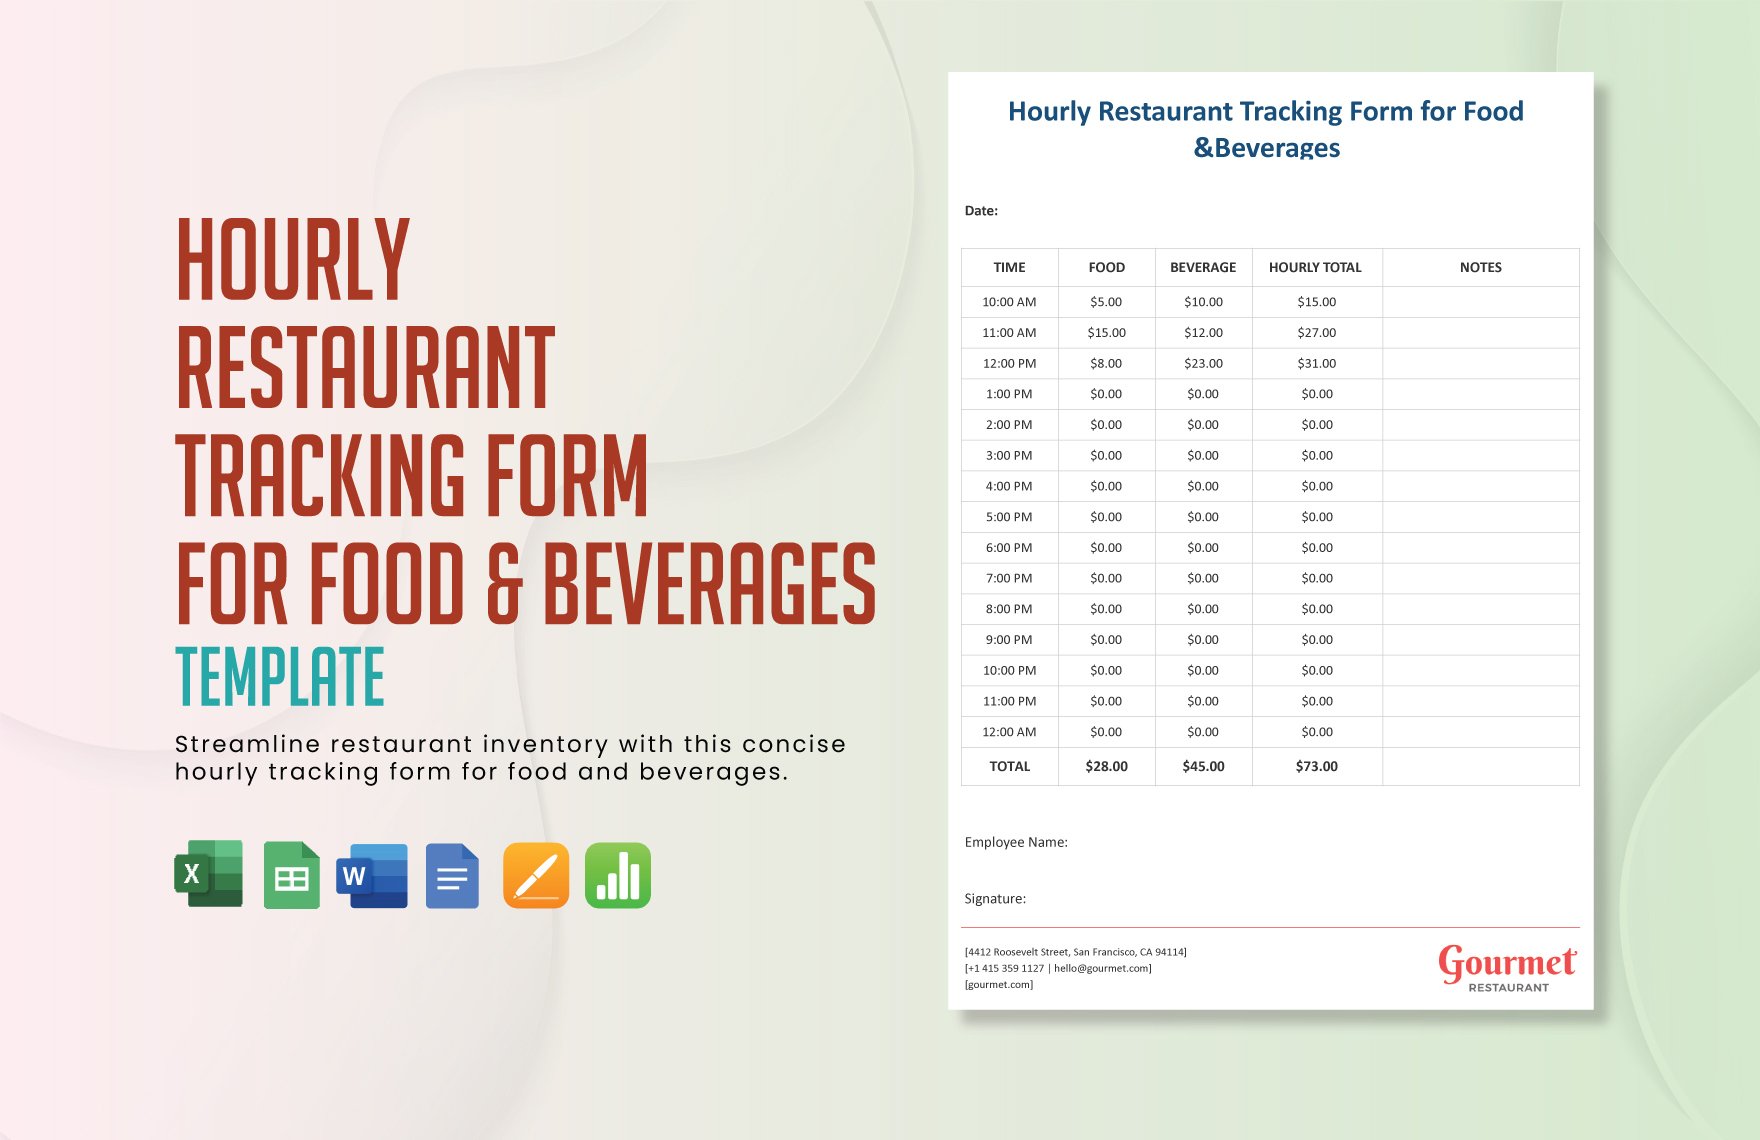 Hourly Restaurant Tracking Form for Food & Beverages Template